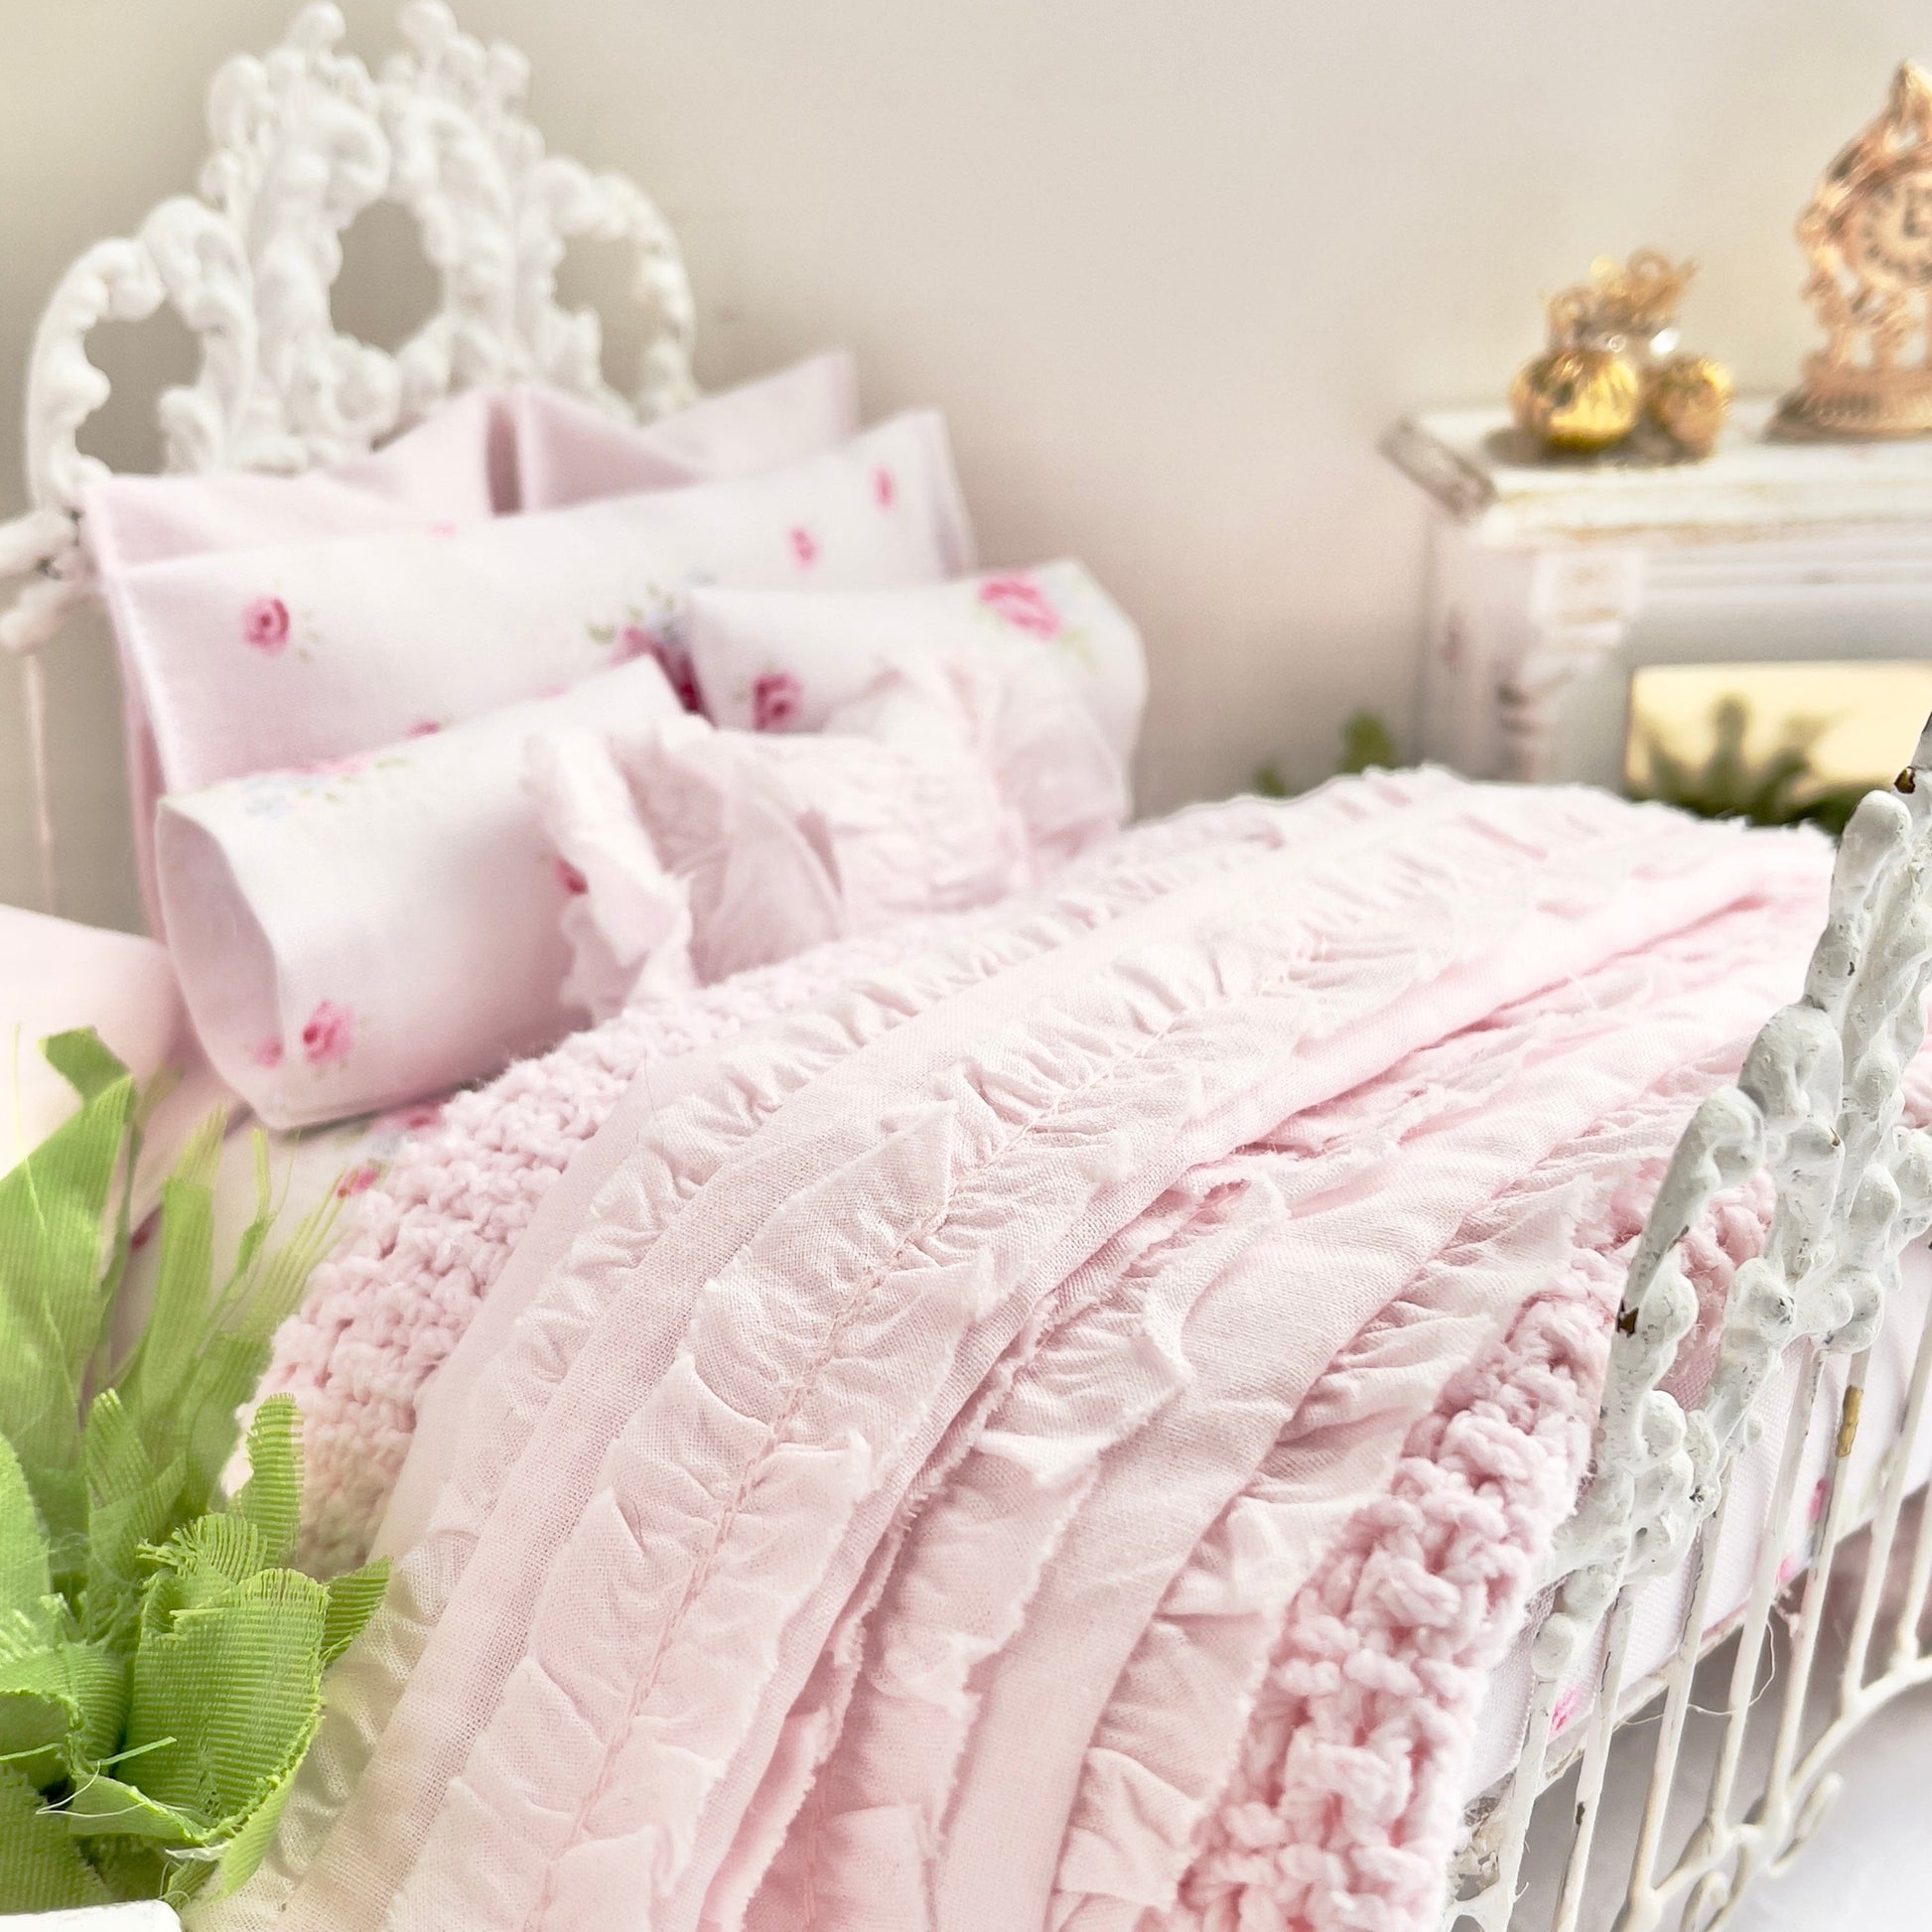 Chantallena Doll House Single Bedding Set Copy of Shabby Cottage |  Nine Piece Shabby Dark Pink Roses Cotton Bedding Set with Pink Chenille Throw | Sandy